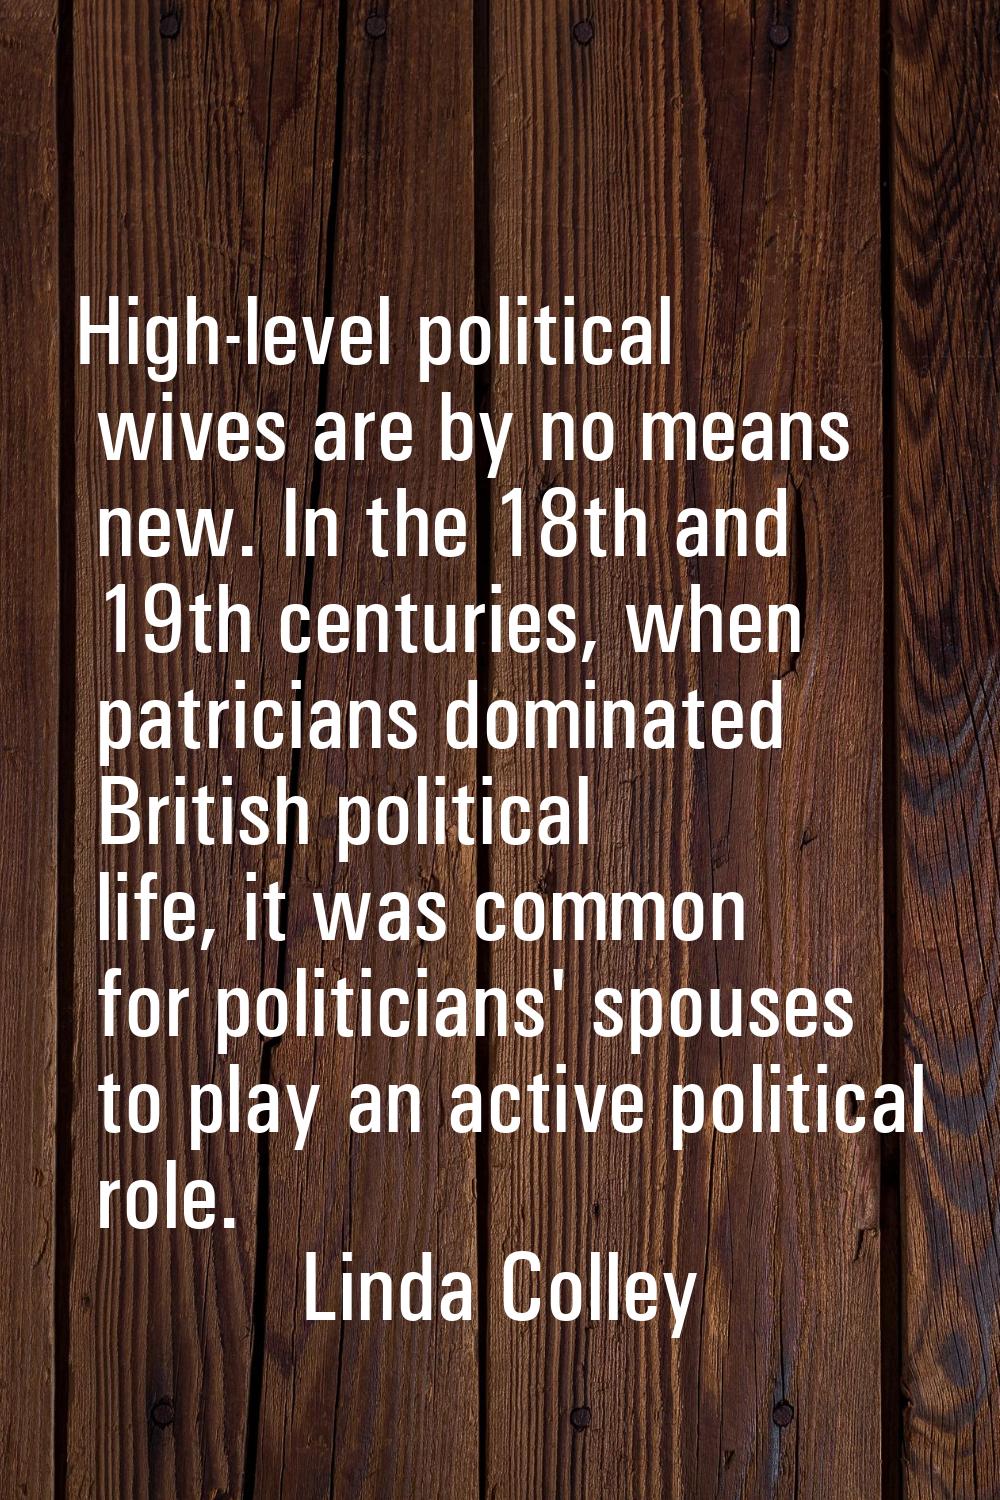 High-level political wives are by no means new. In the 18th and 19th centuries, when patricians dom